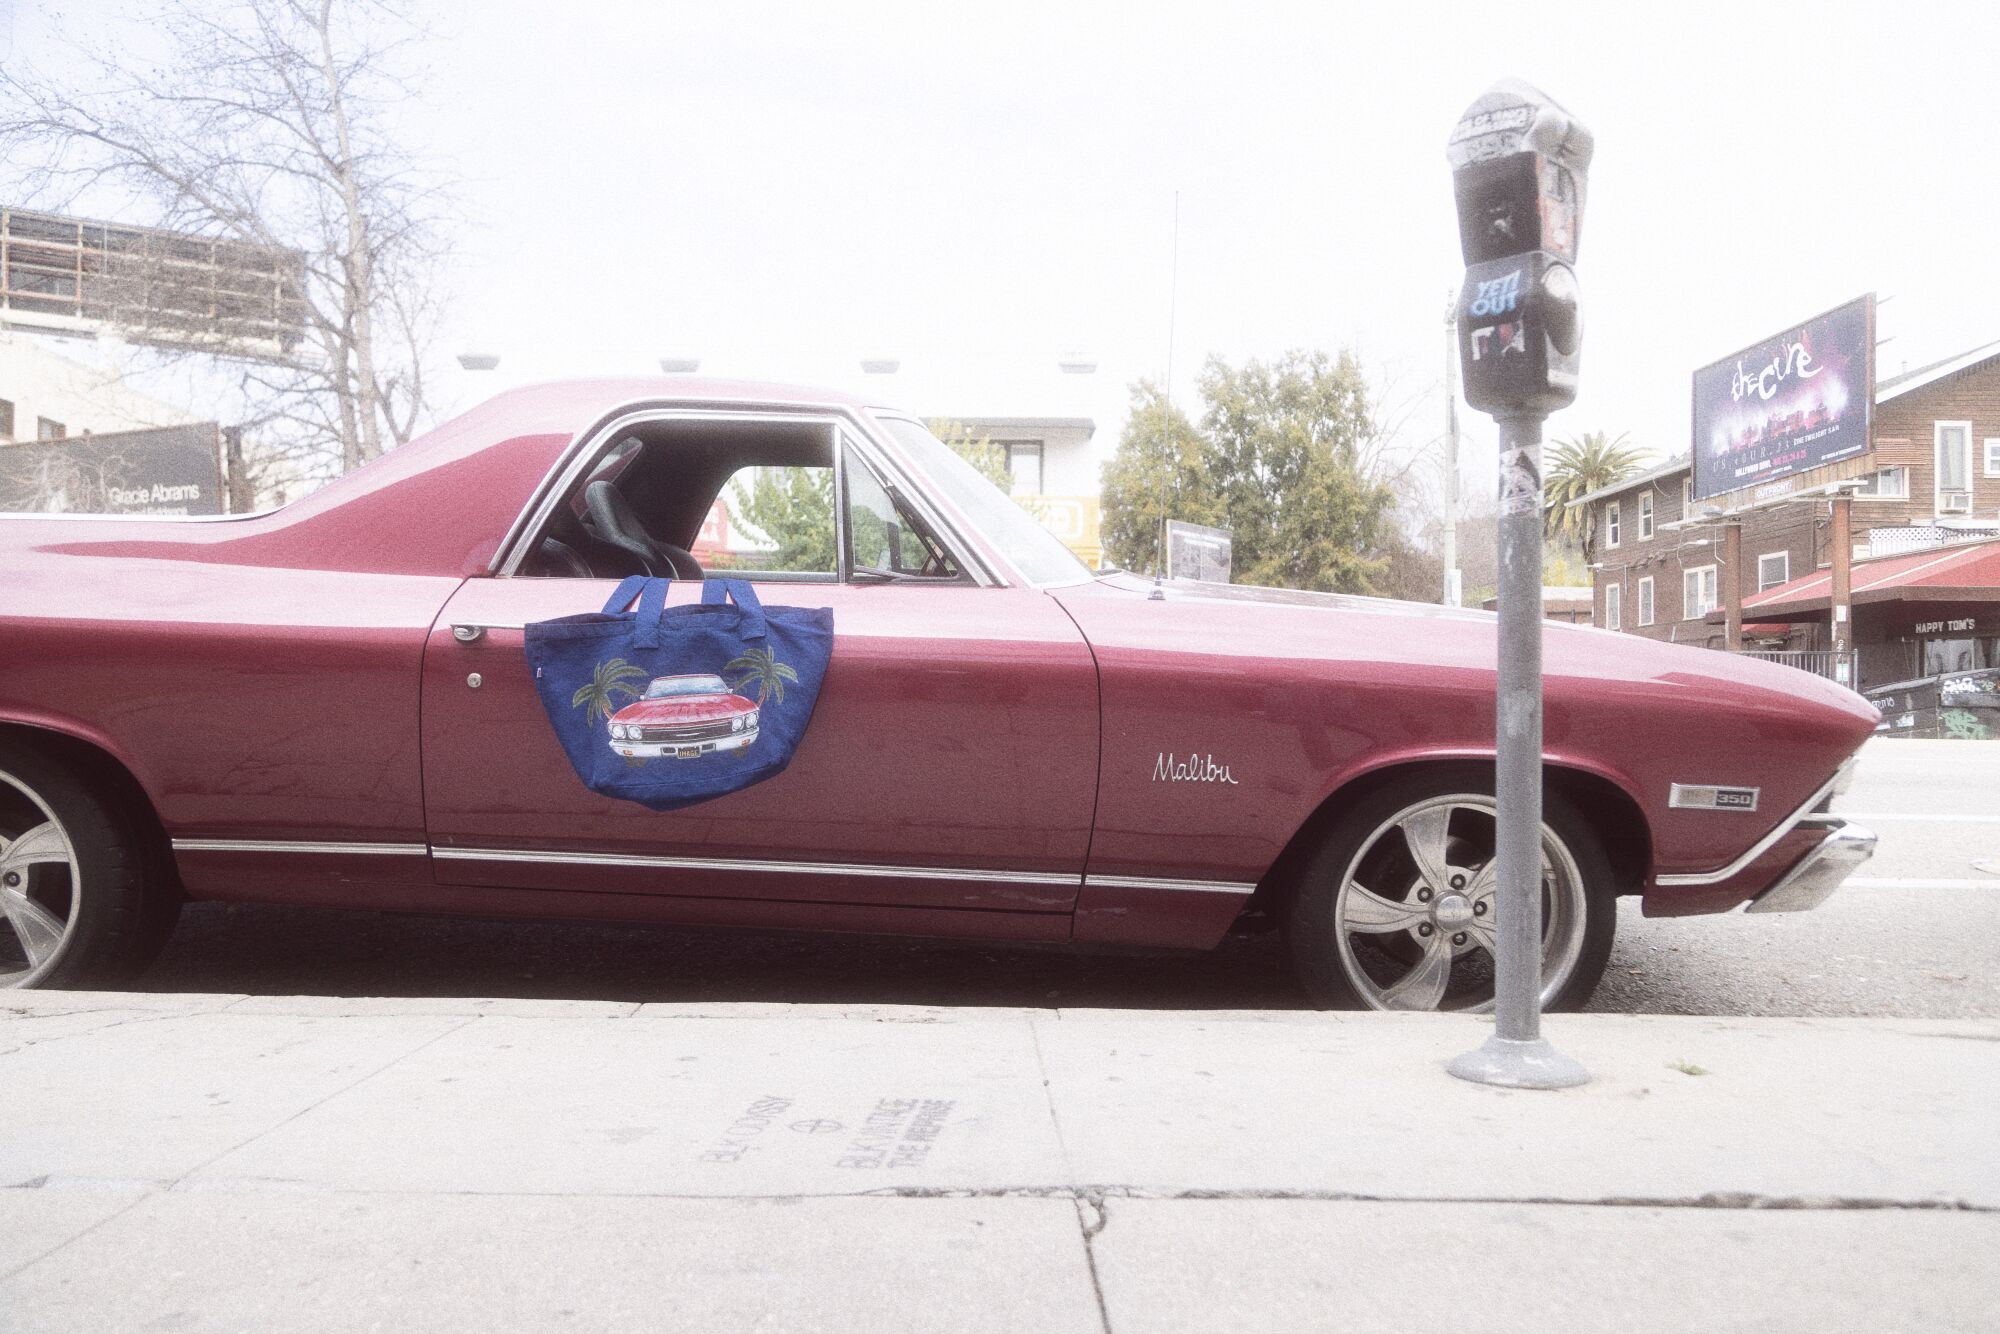 A parked pink El Camino with a blue tote bag hanging out of the window.